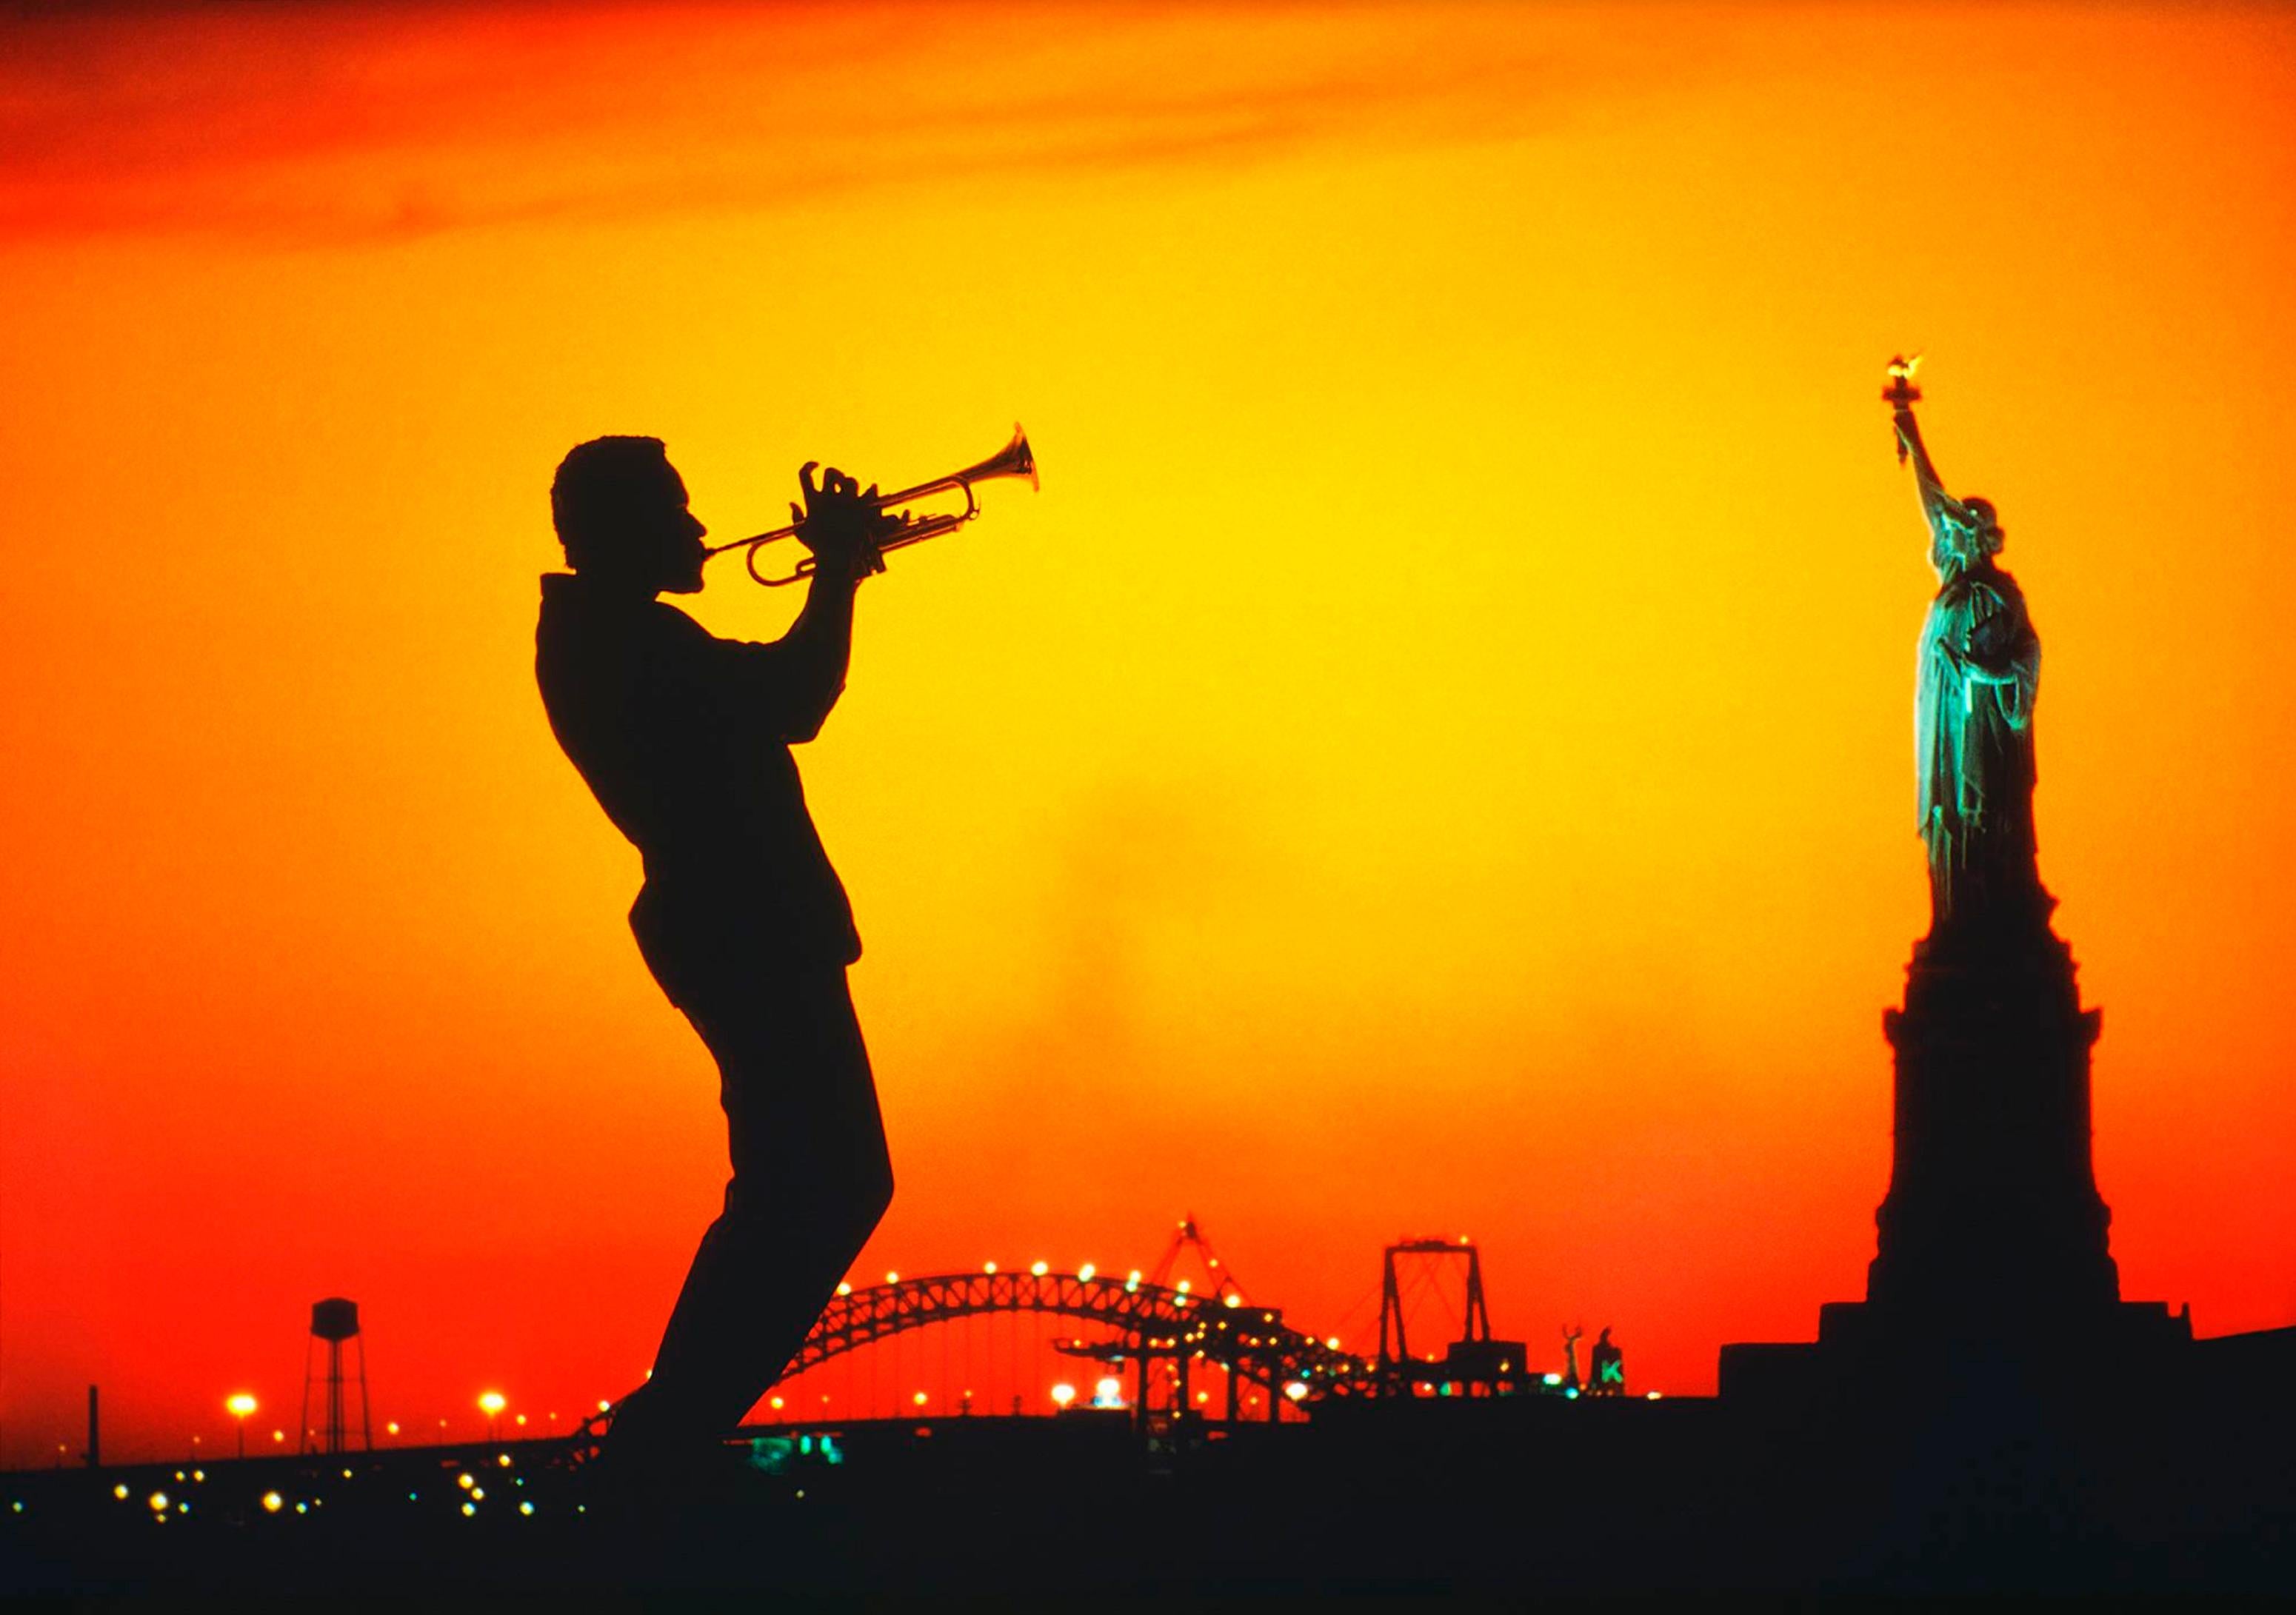 Trumpet Jazz Musician  and Statue of Liberty